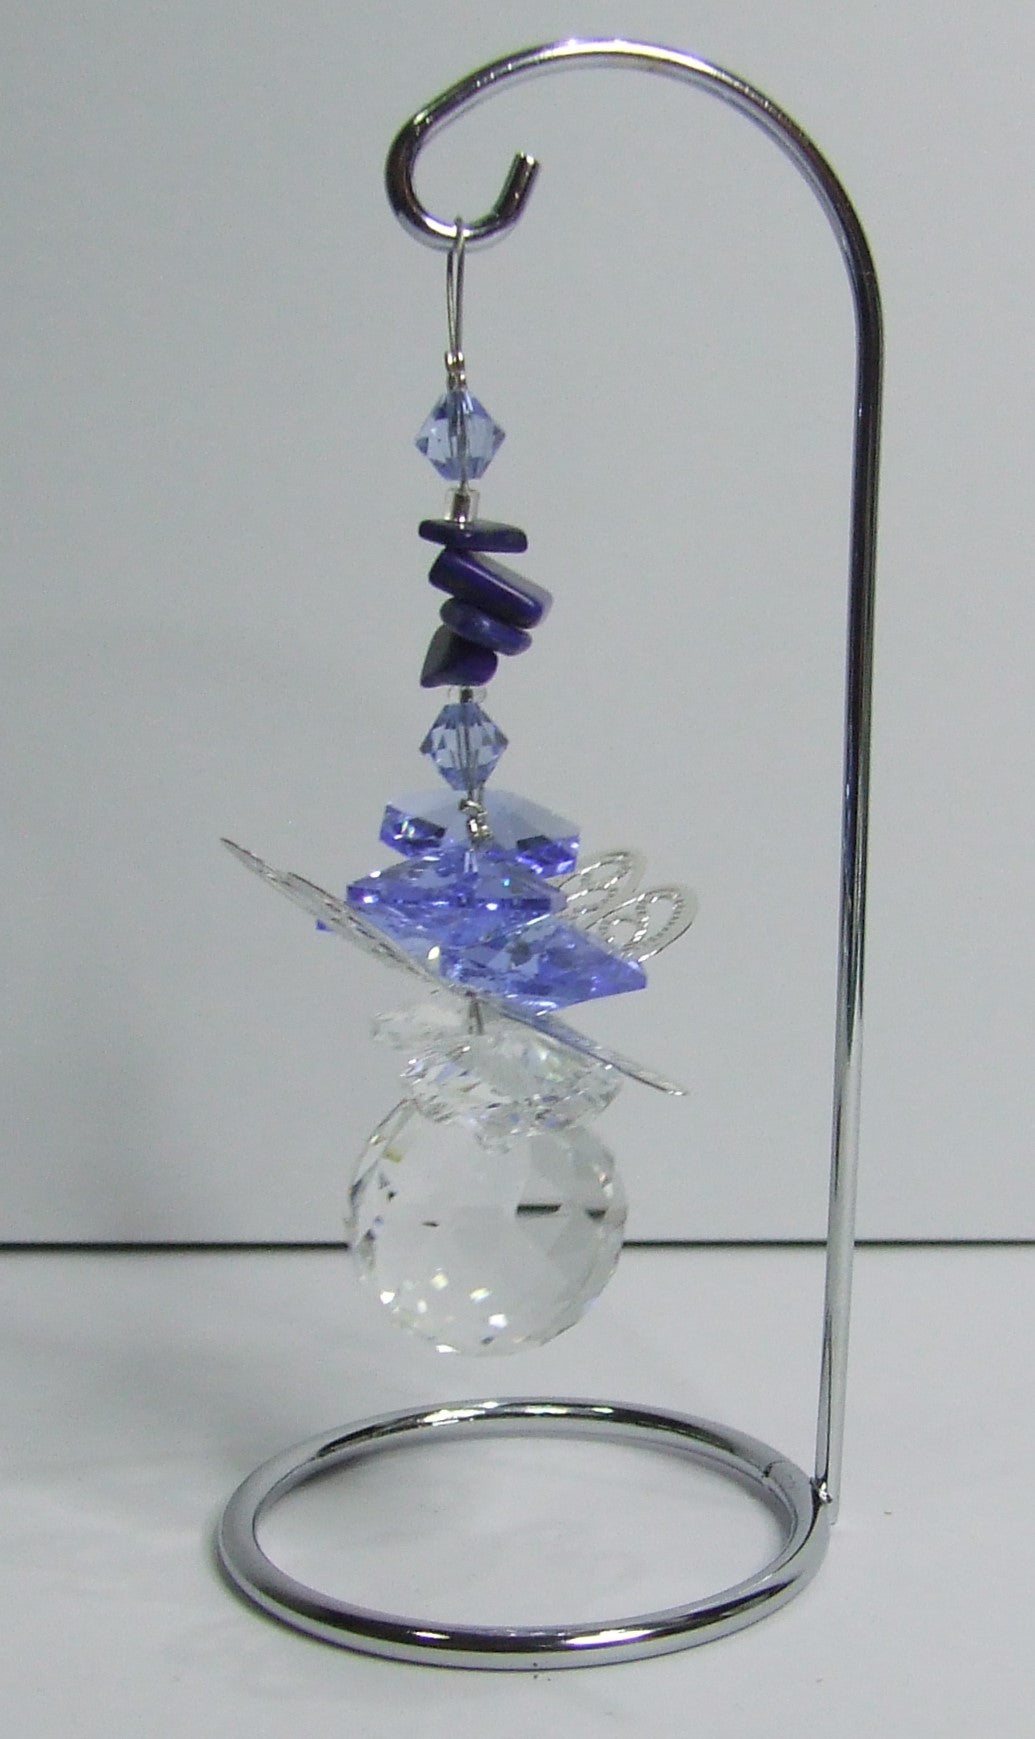 Dragonfly -blue crystal suncatcher is decorated with lapis lazuli gemstones and come on this amazing small stand.